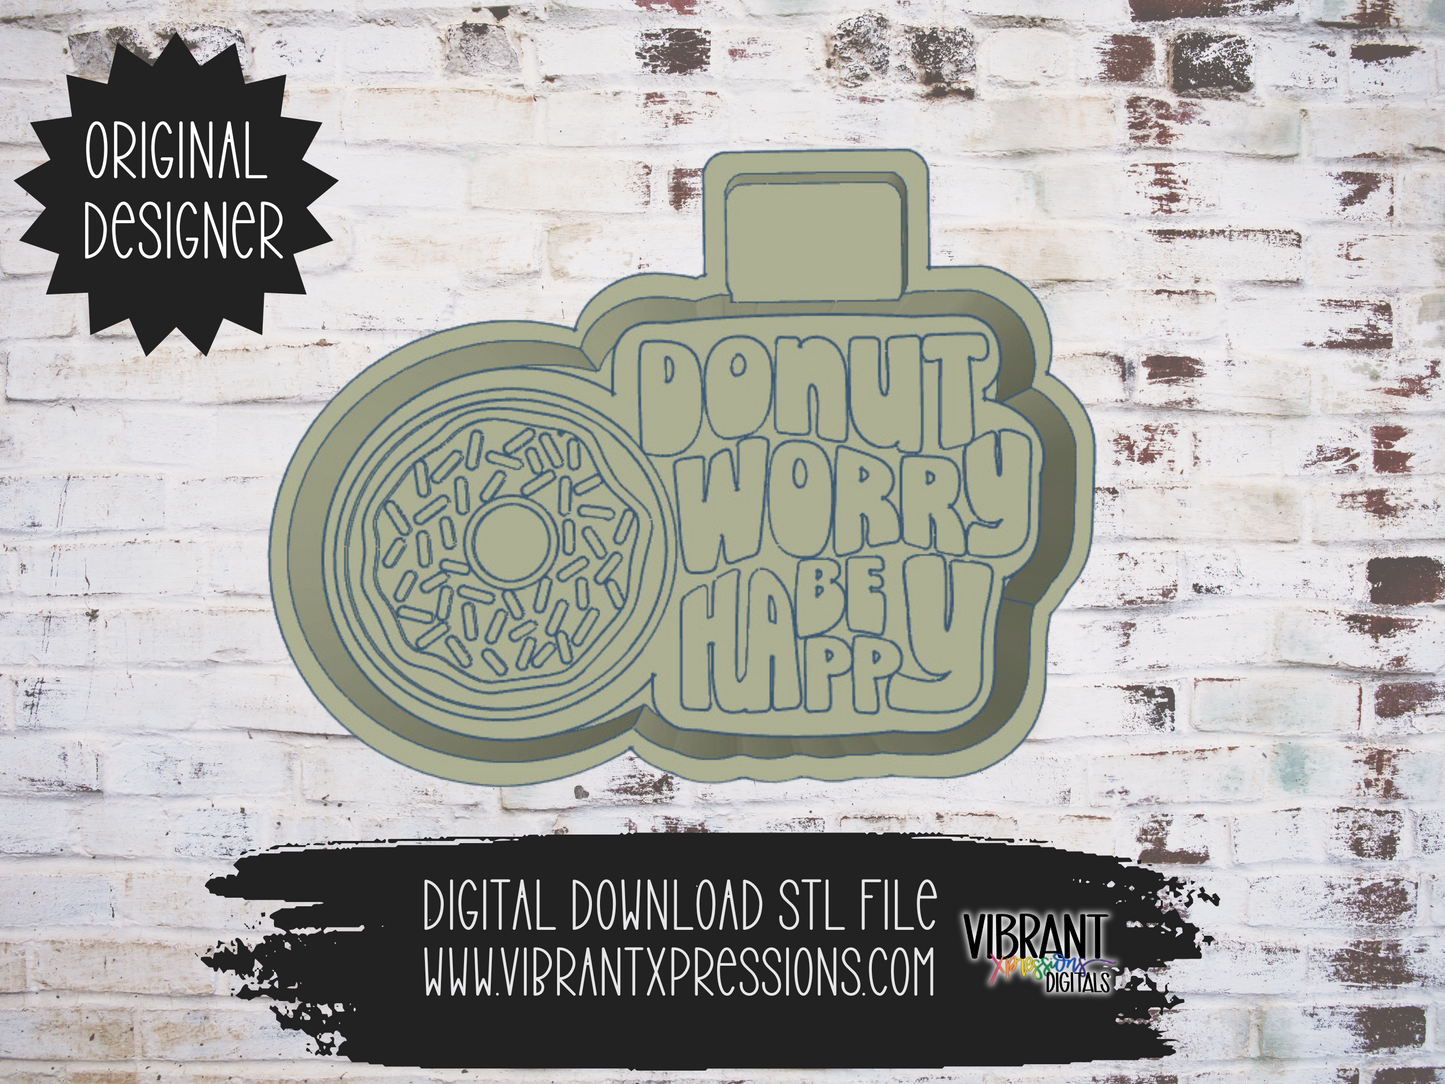 Donut Worry Be Happy Housing Mold Maker STL File